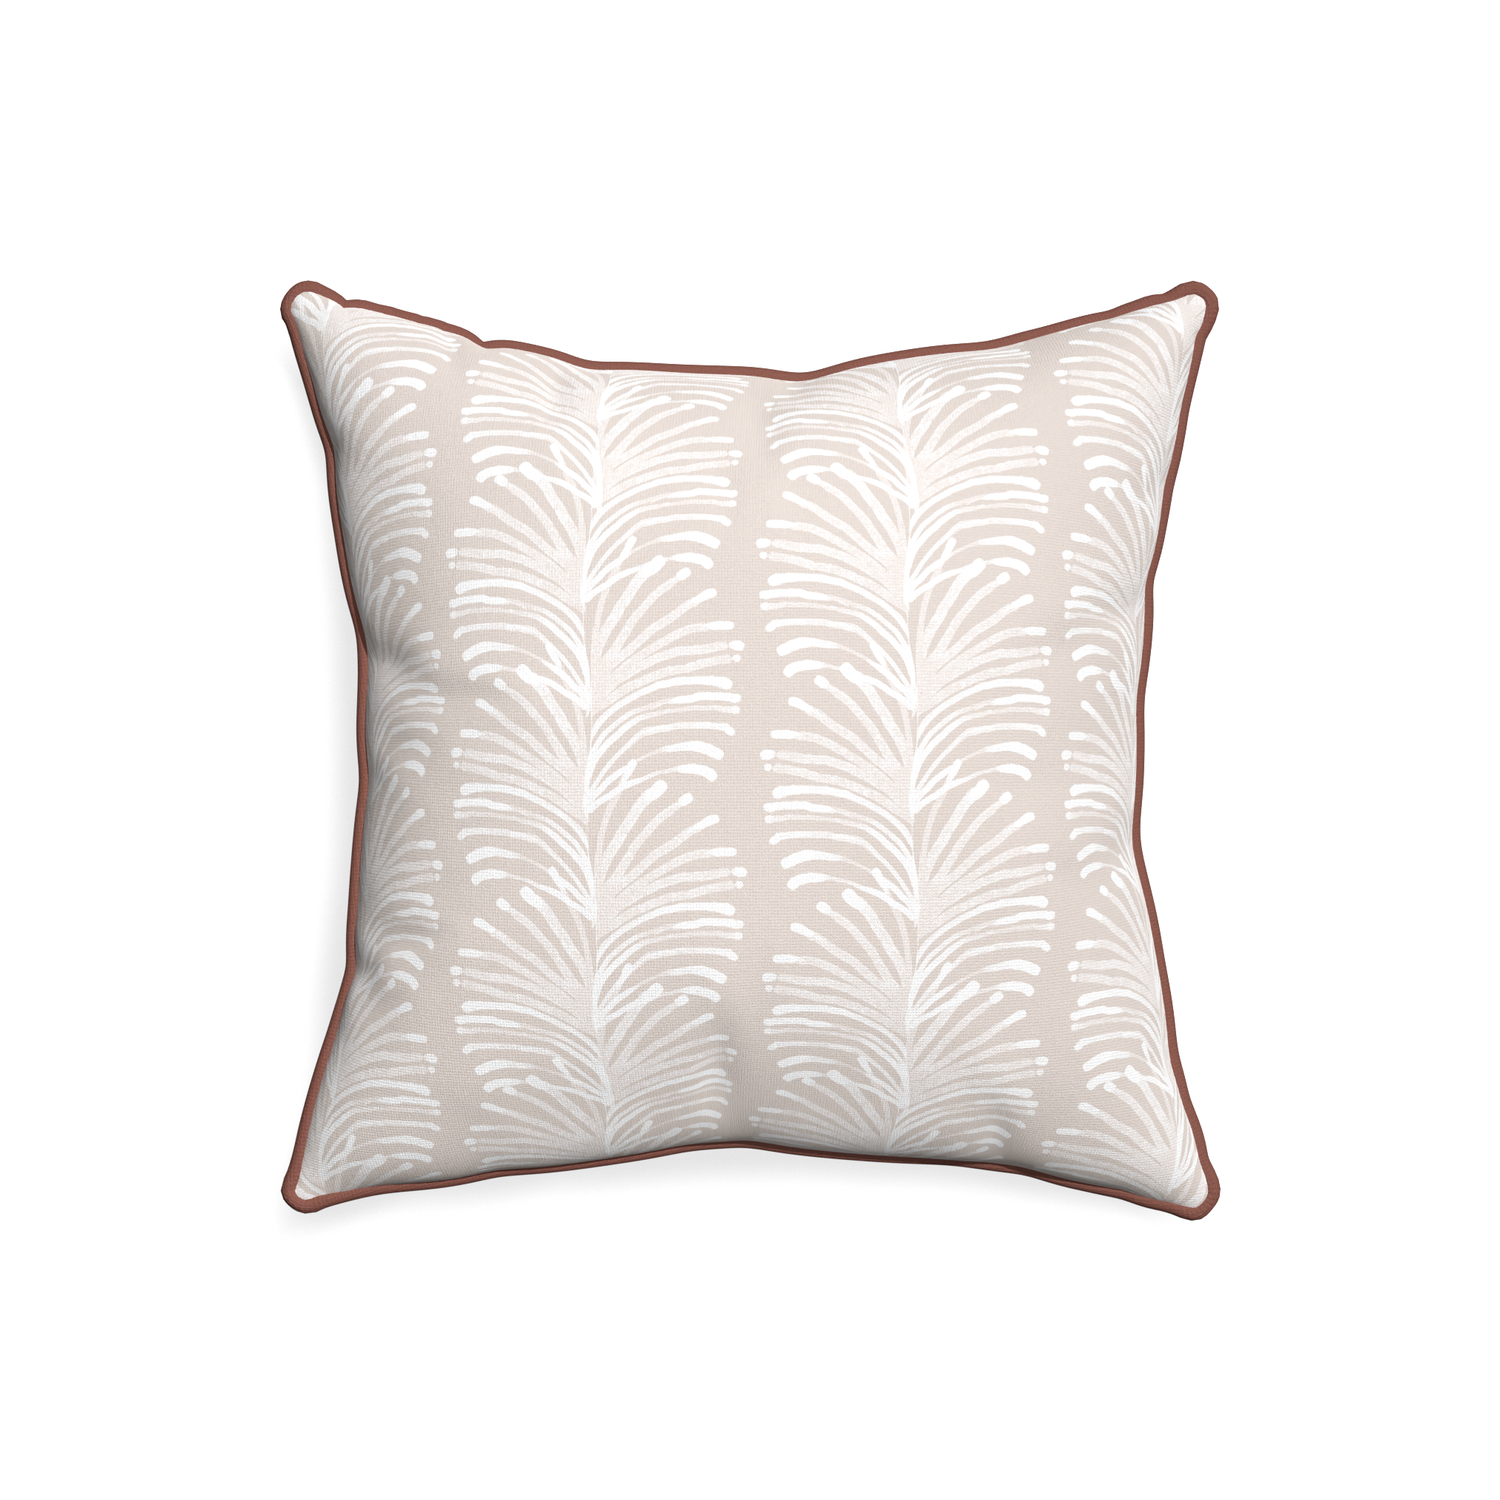 20-square emma sand custom pillow with w piping on white background